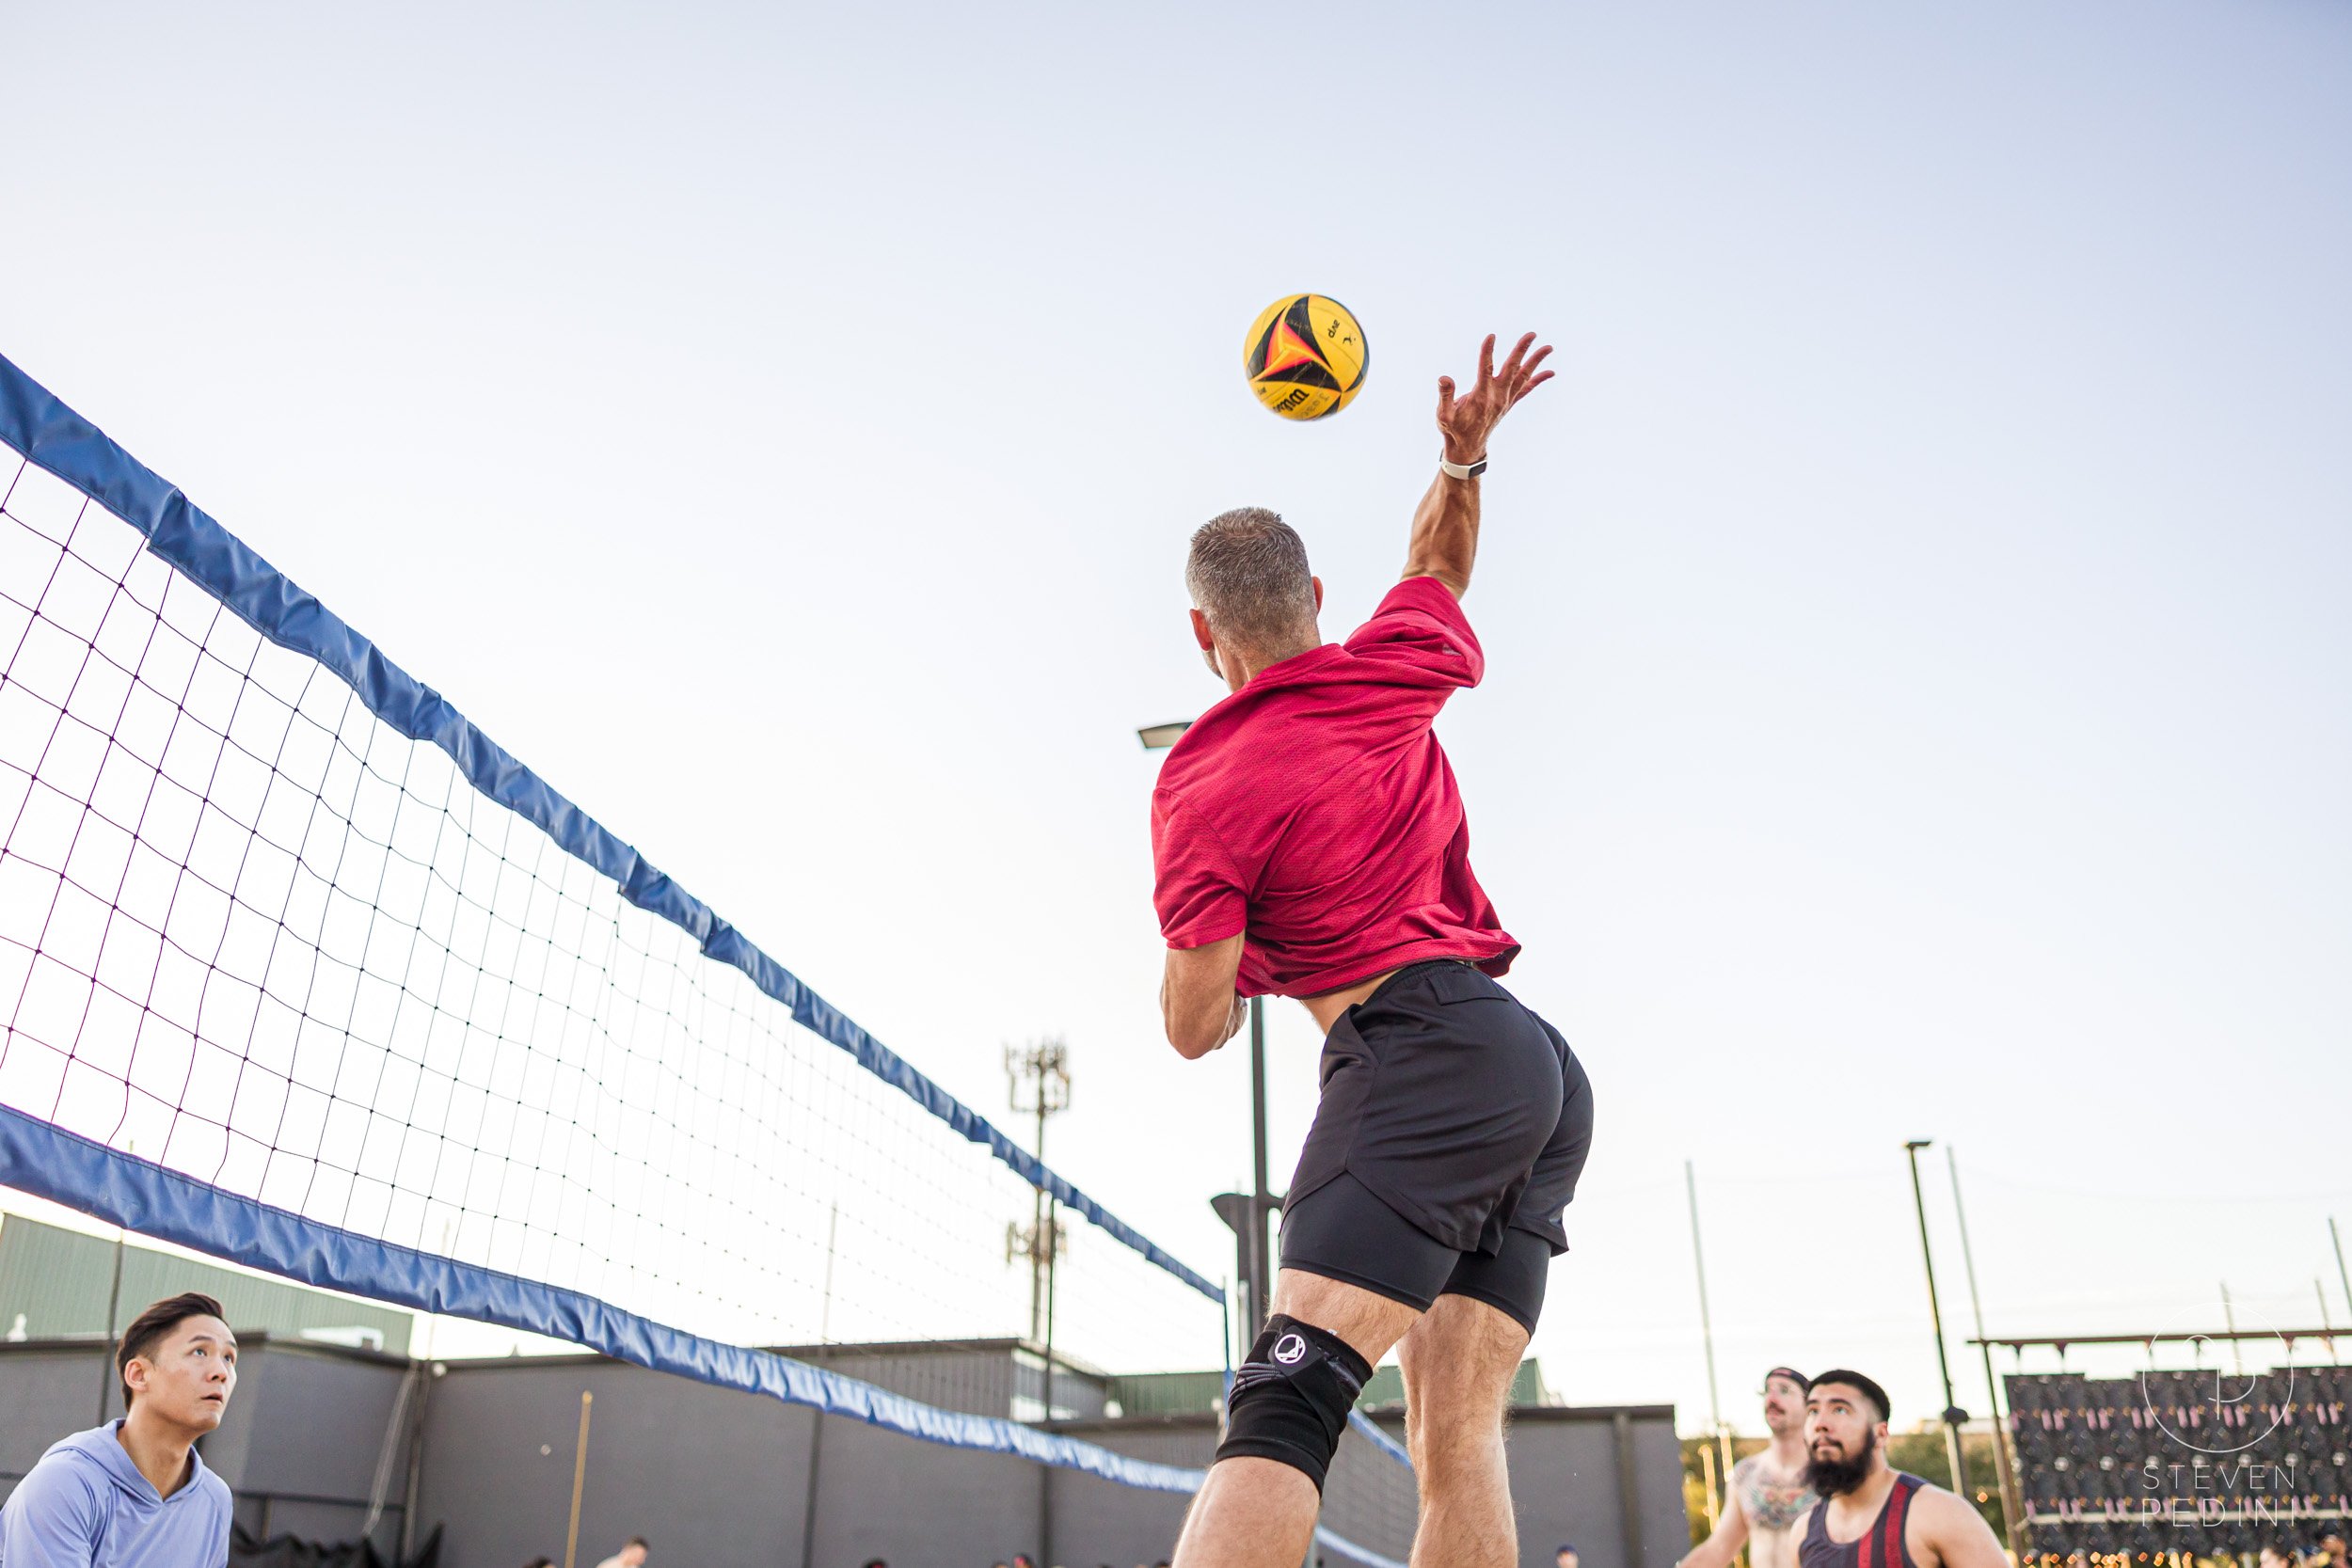 Steven Pedini Photography - Bumpy Pickle - Sand Volleyball - Houston TX - World Cup of Volleyball - 00186.jpg